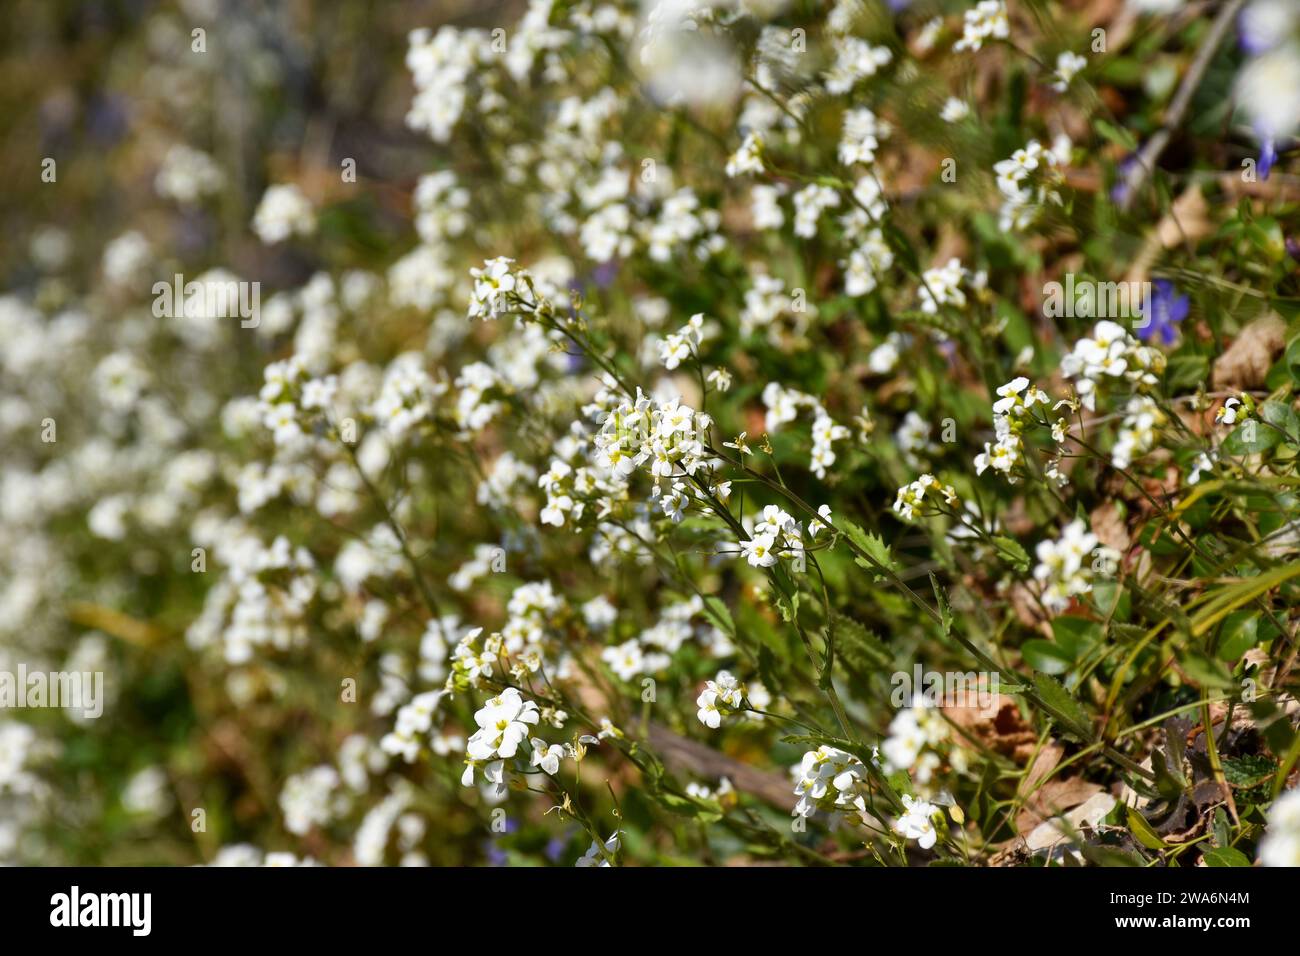 A bunch of white flowers that are growing in a field of grass Stock Photo